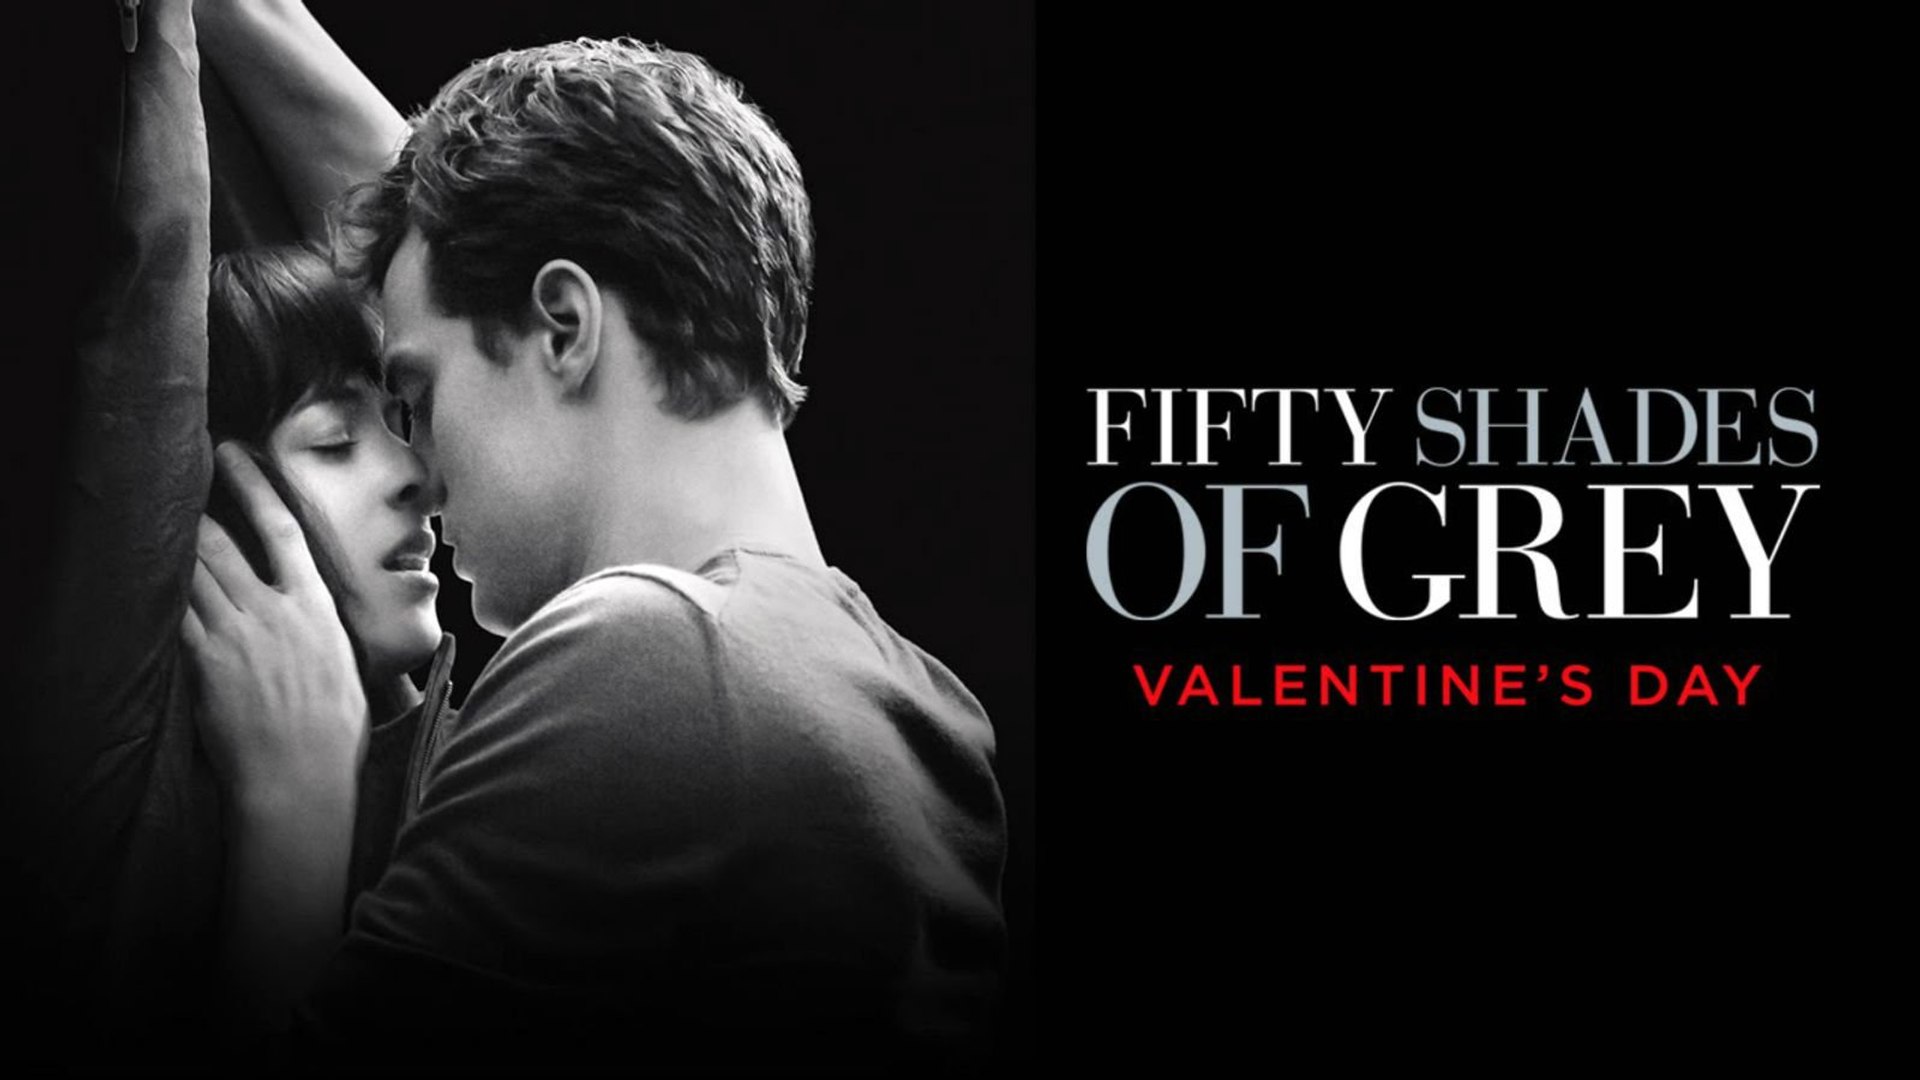 Fifty shades of grey movie download in hindi hd